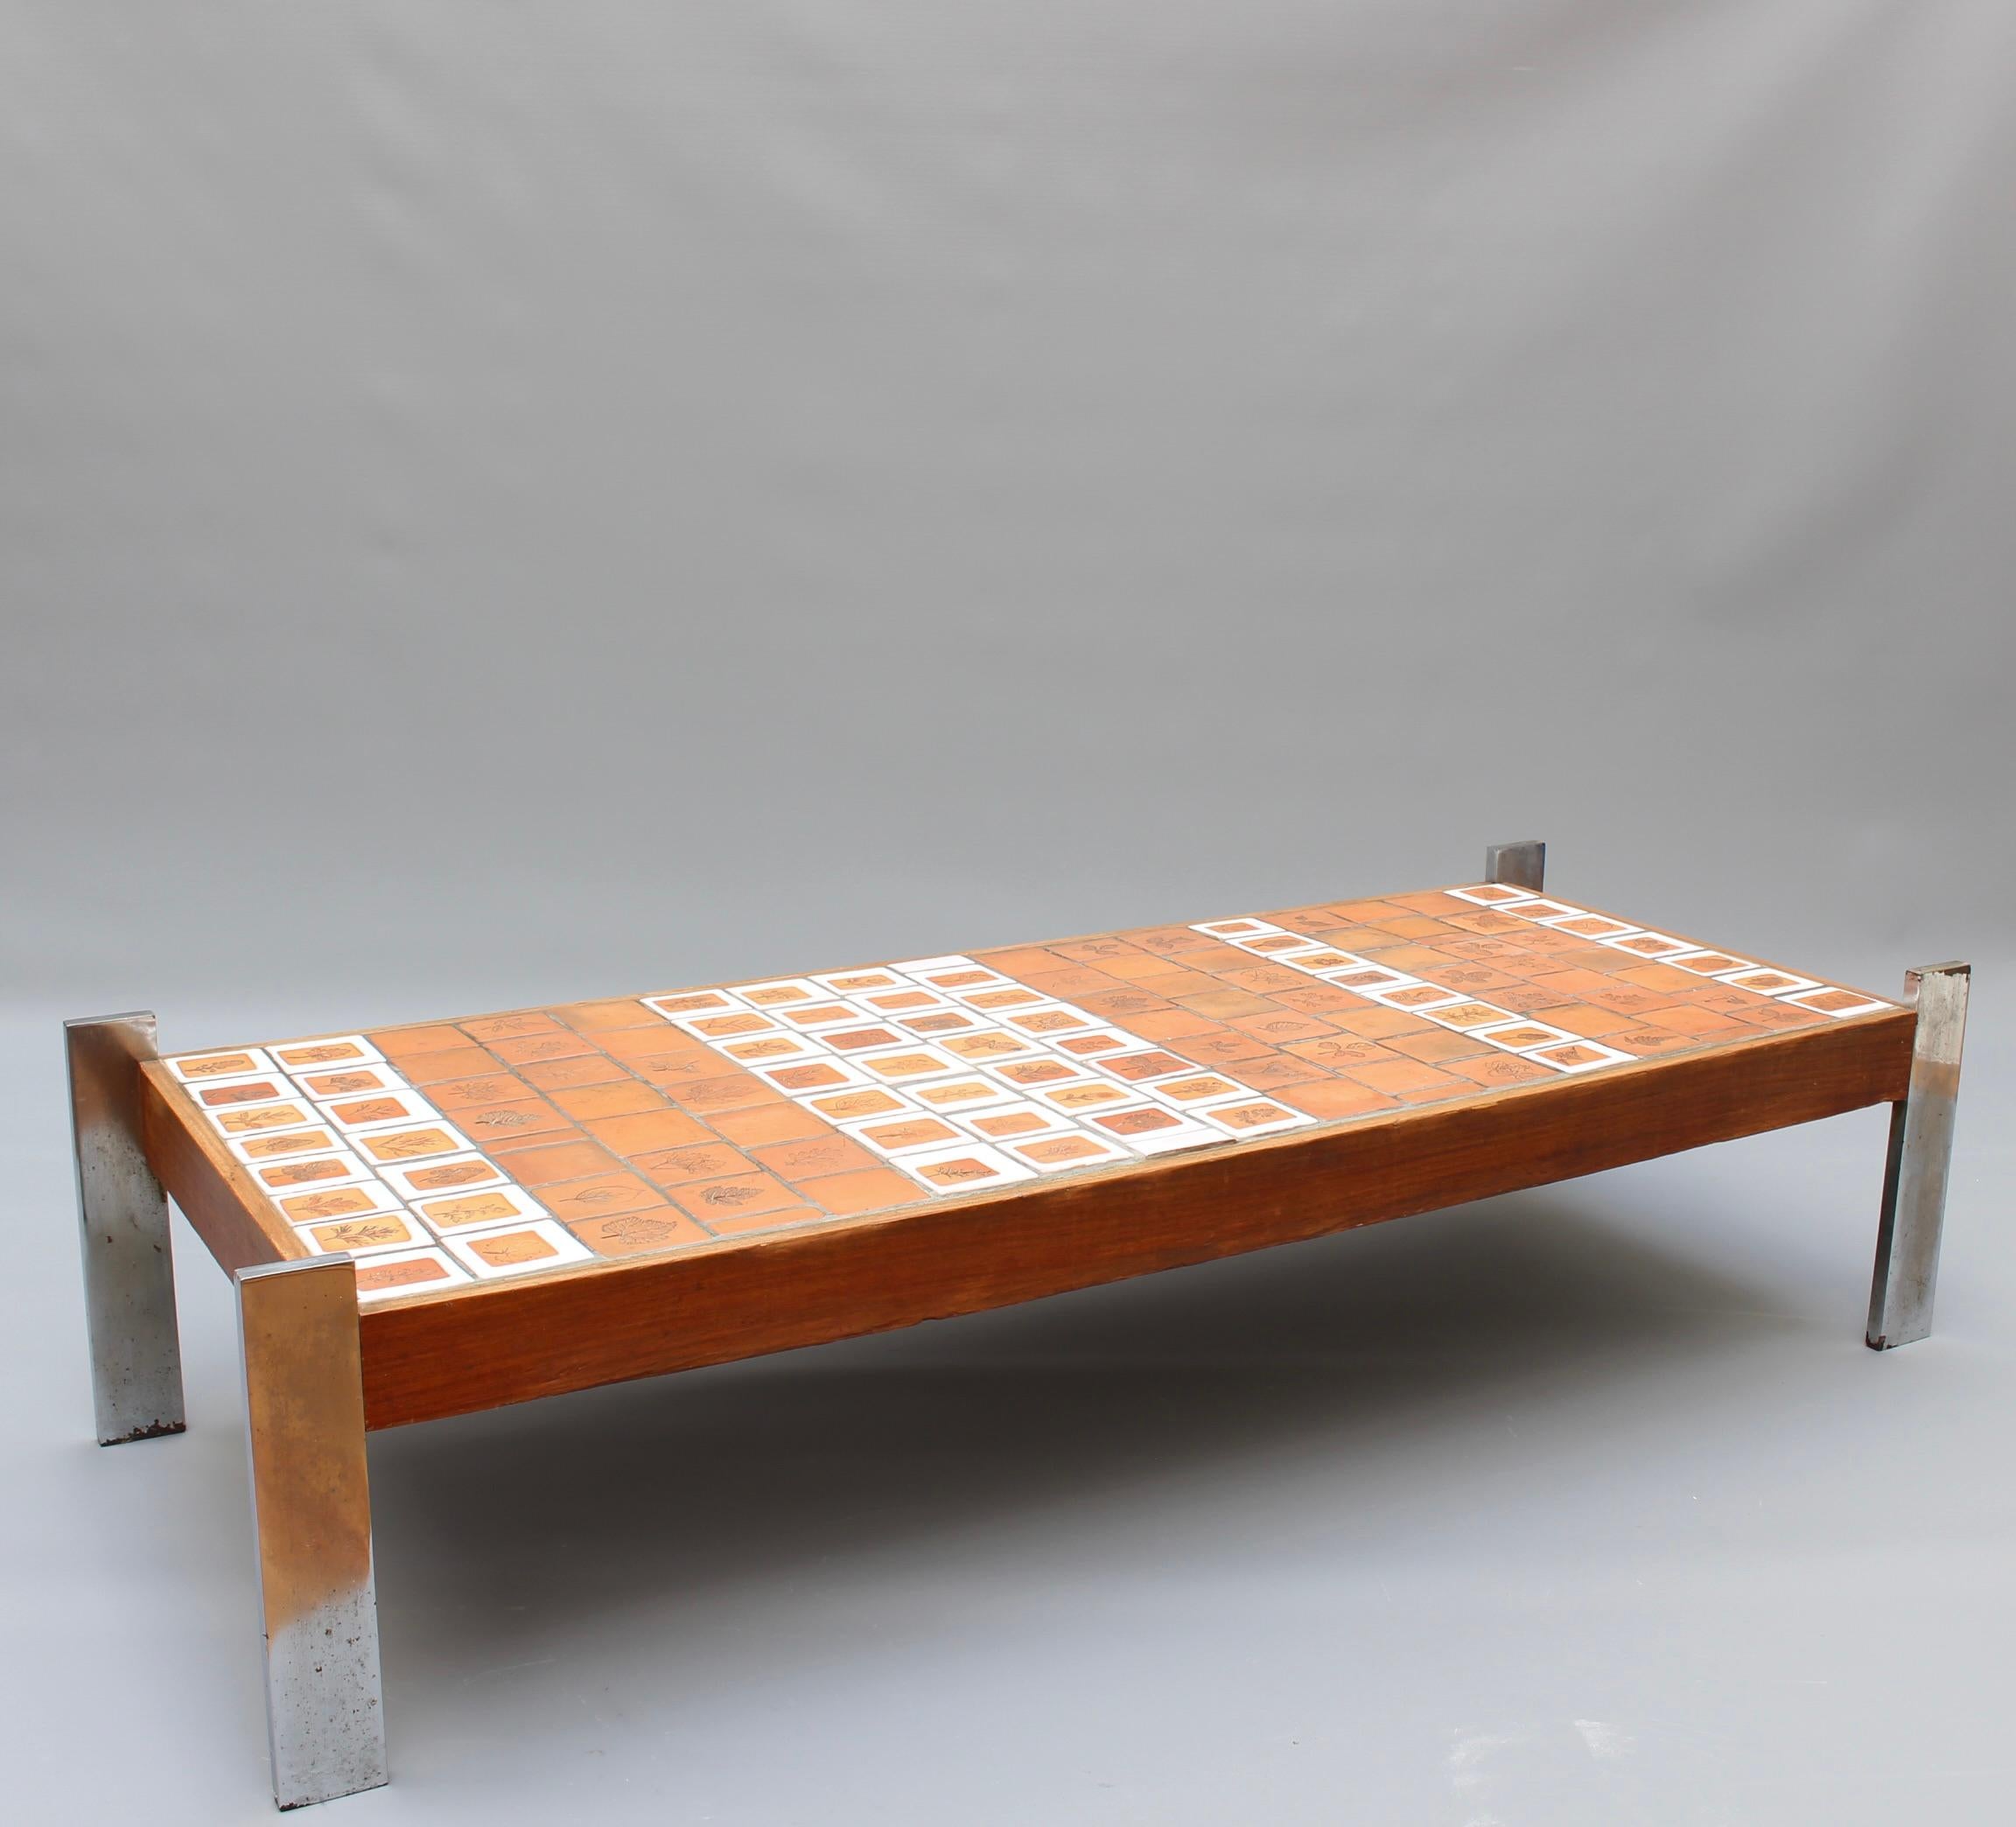 Late 20th Century Vintage French Coffee Table with Leaf Motif Tiles by Roger Capron (circa 1970s) For Sale